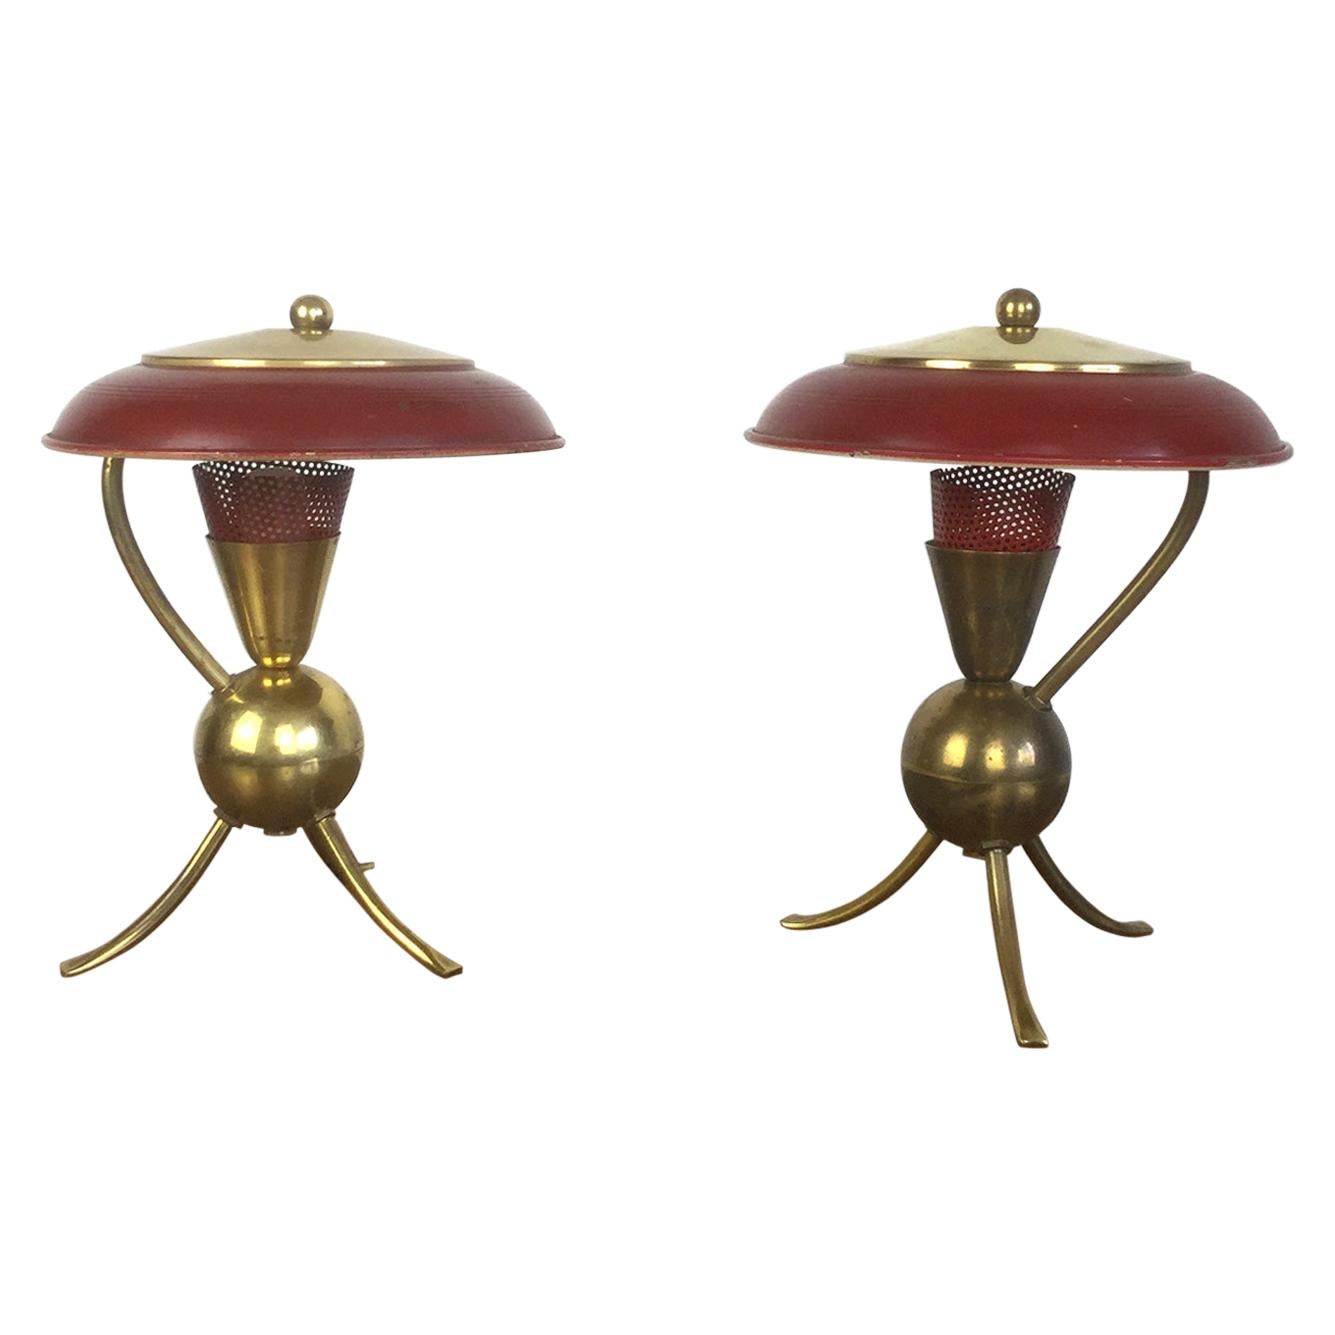 Pair of Red Enamel and Brass Tripod Table Lamp, French, 1950s